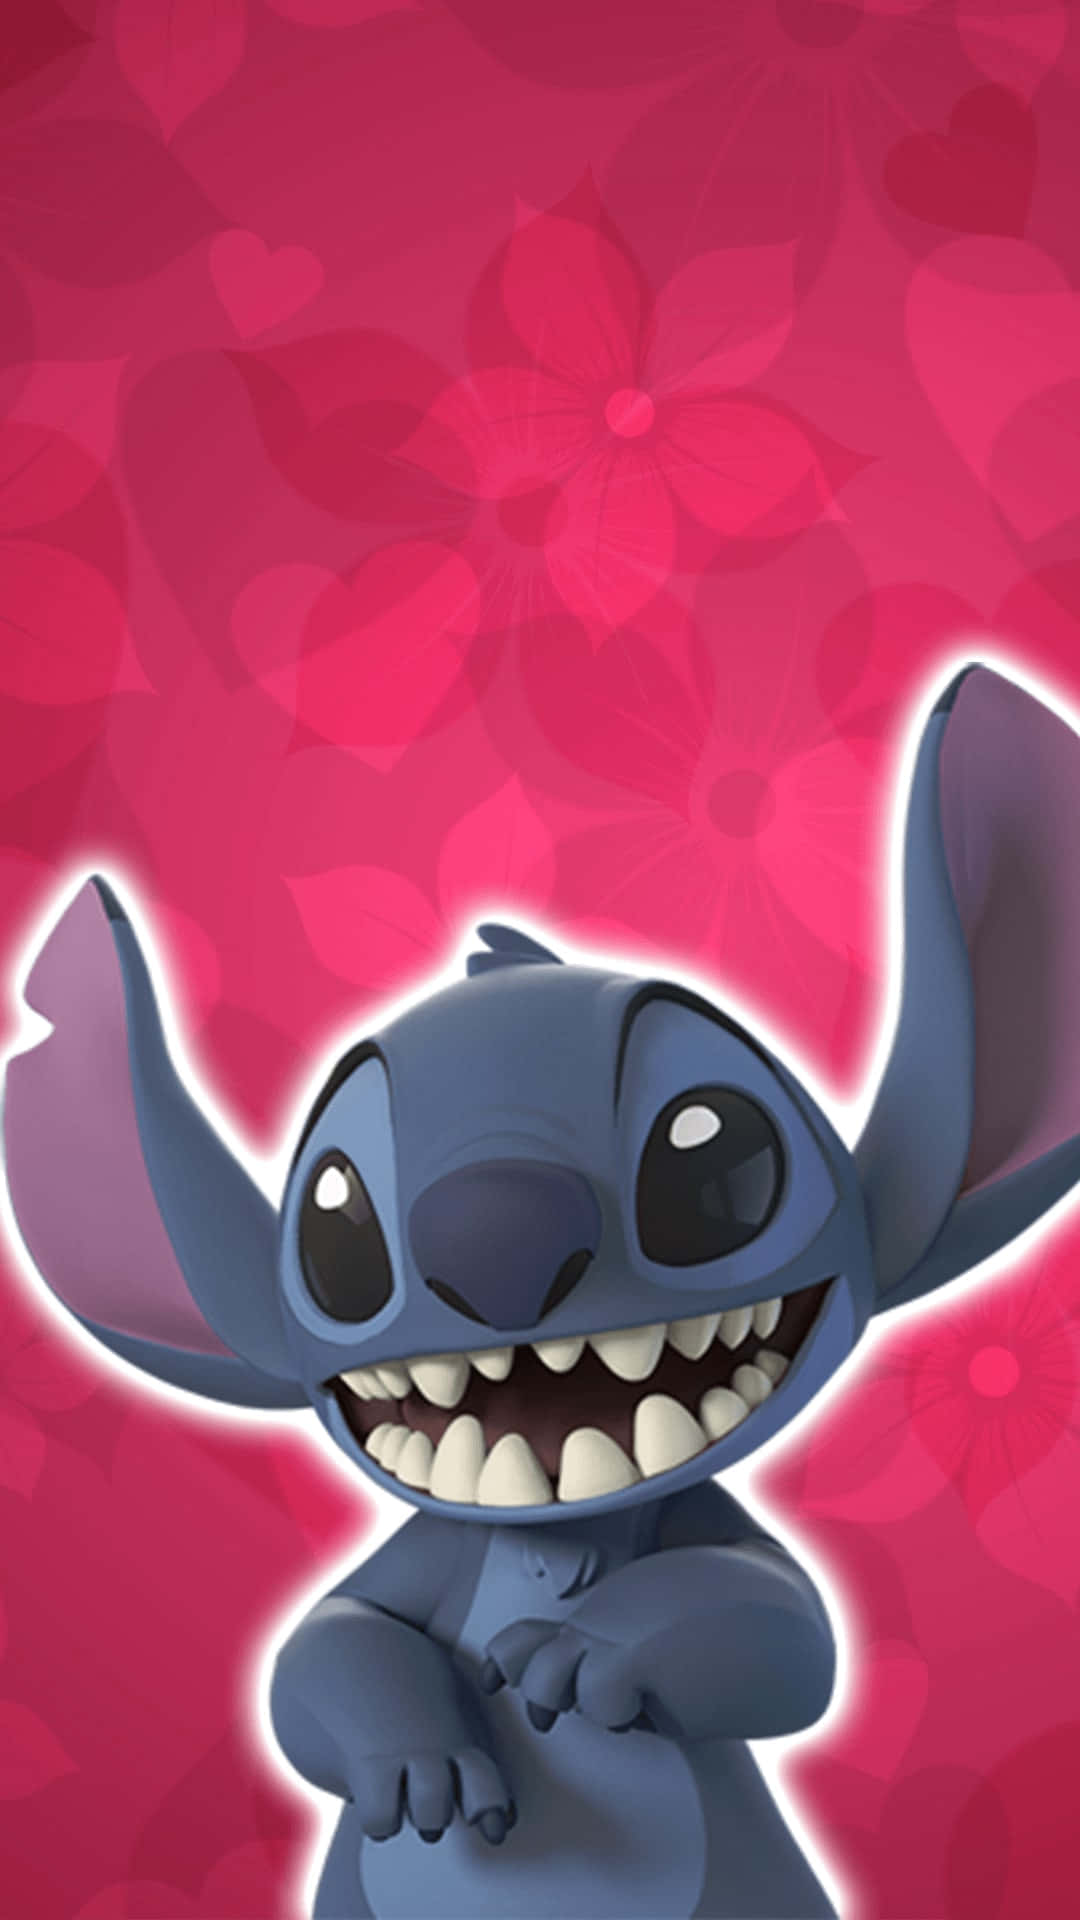 Show your special someone some love this Valentine's Day with Disney! Wallpaper